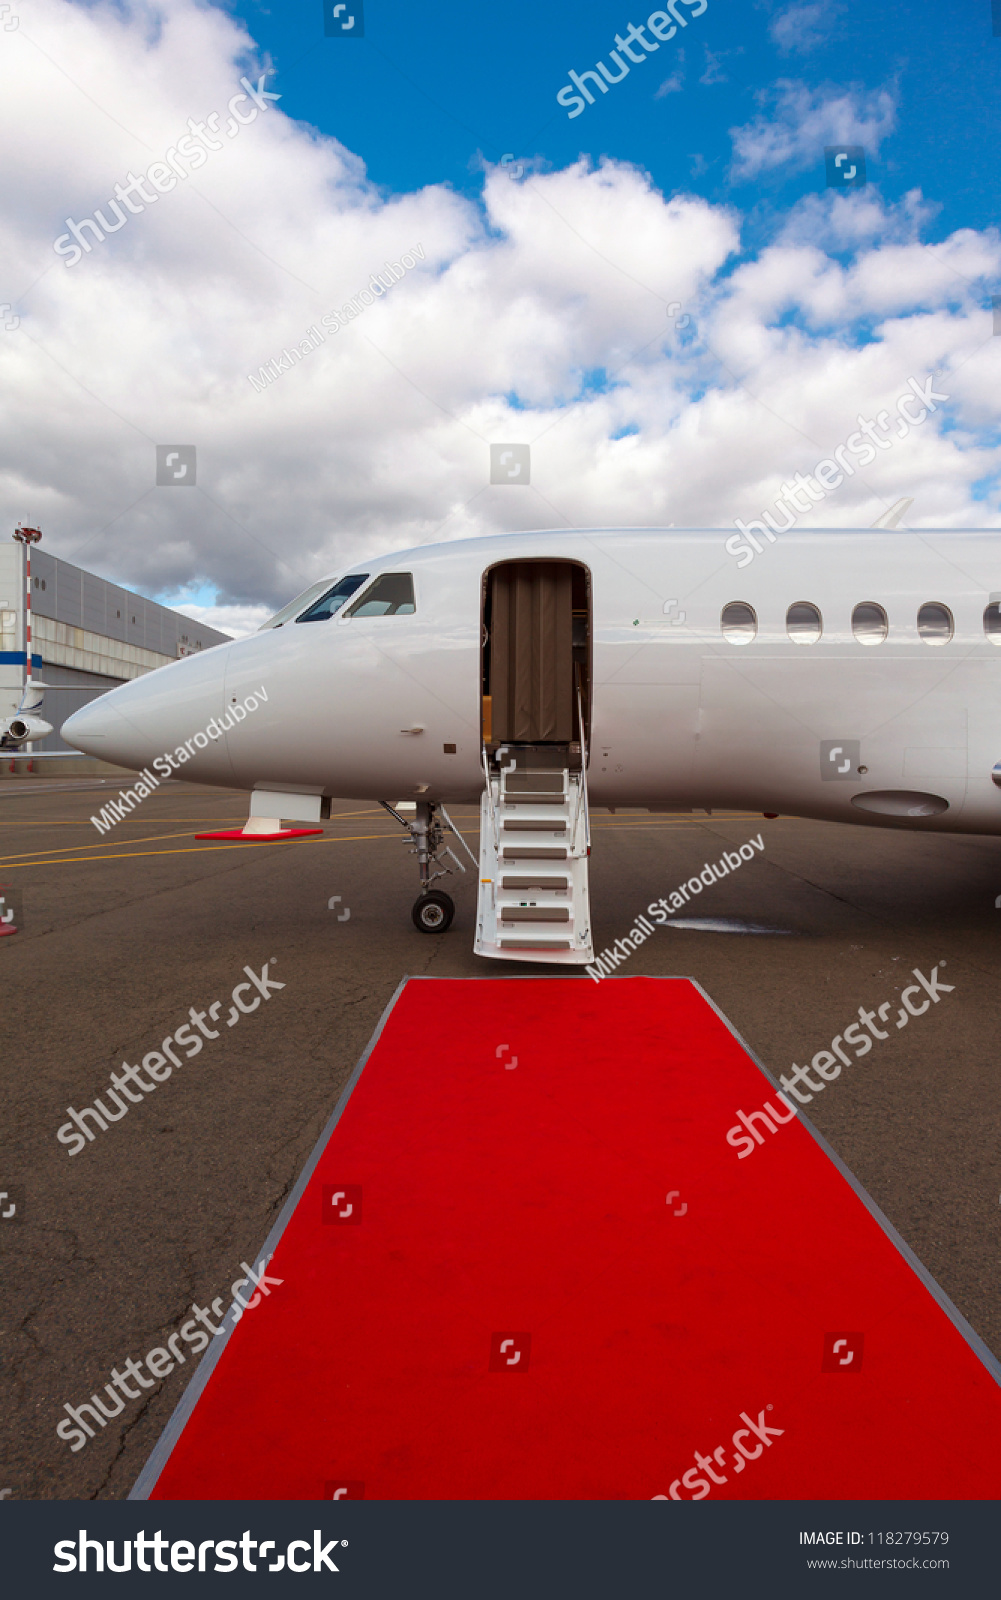 White Private Jet And Open Ladder, Red Carpet At Airport, Background Blue Sky Stock Photo